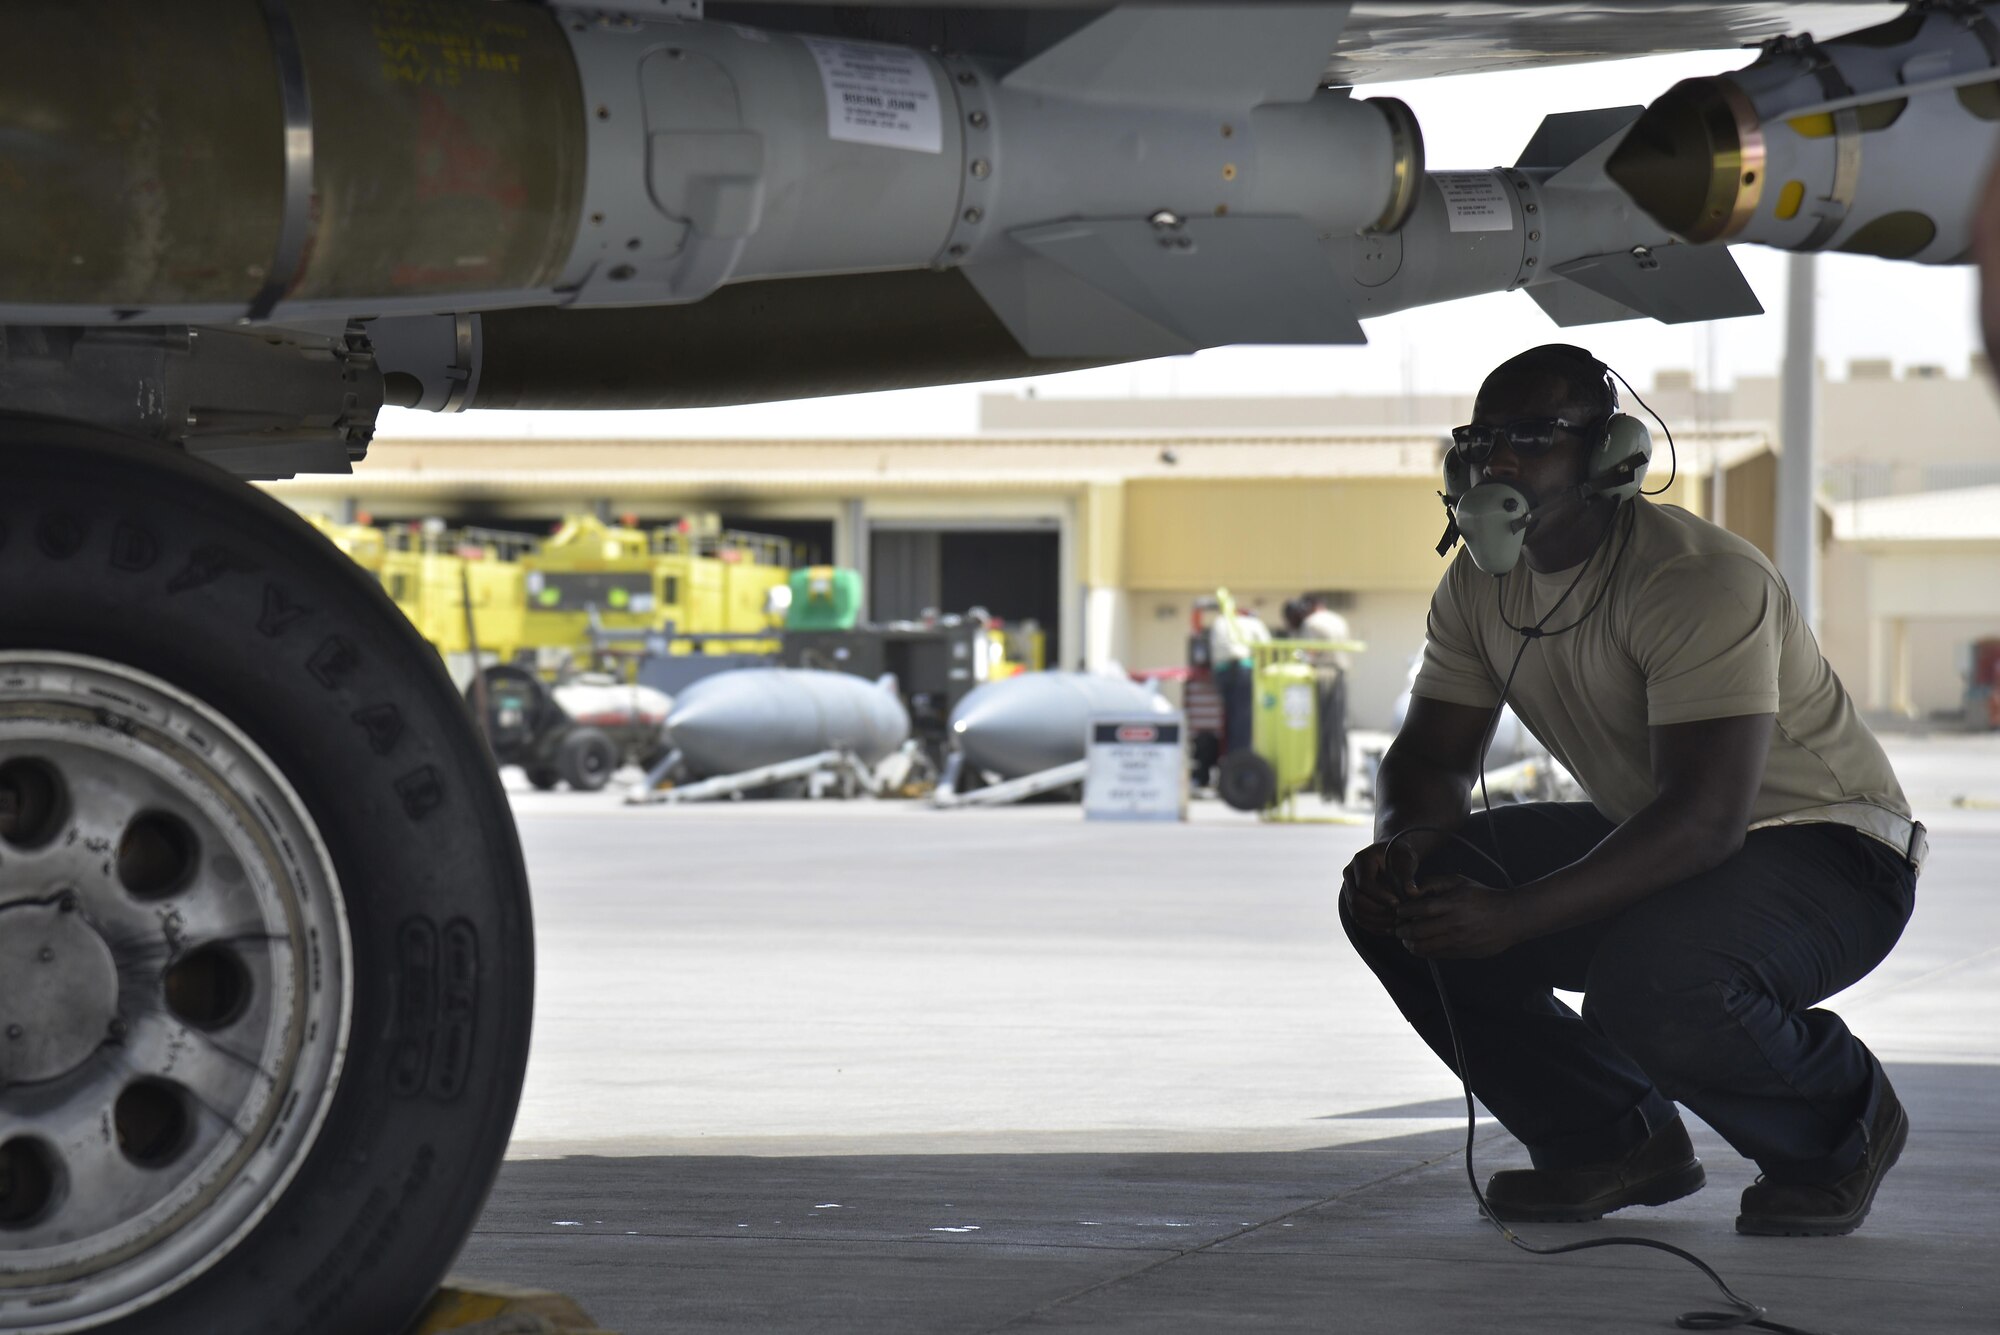 Staff Sgt. Oren performs a visual inspection underneath an F-15E Strike Eagle for hydraulic and gas leaks during launching procedures at an undisclosed location in Southwest Asia May 31, 2015. Sgt. Oren is a dedicated crew chief assigned to the 380th Expeditionary Aircraft Maintenance Squadron. (U.S. Air Force photo/Tech. Sgt. Christopher Boitz) 